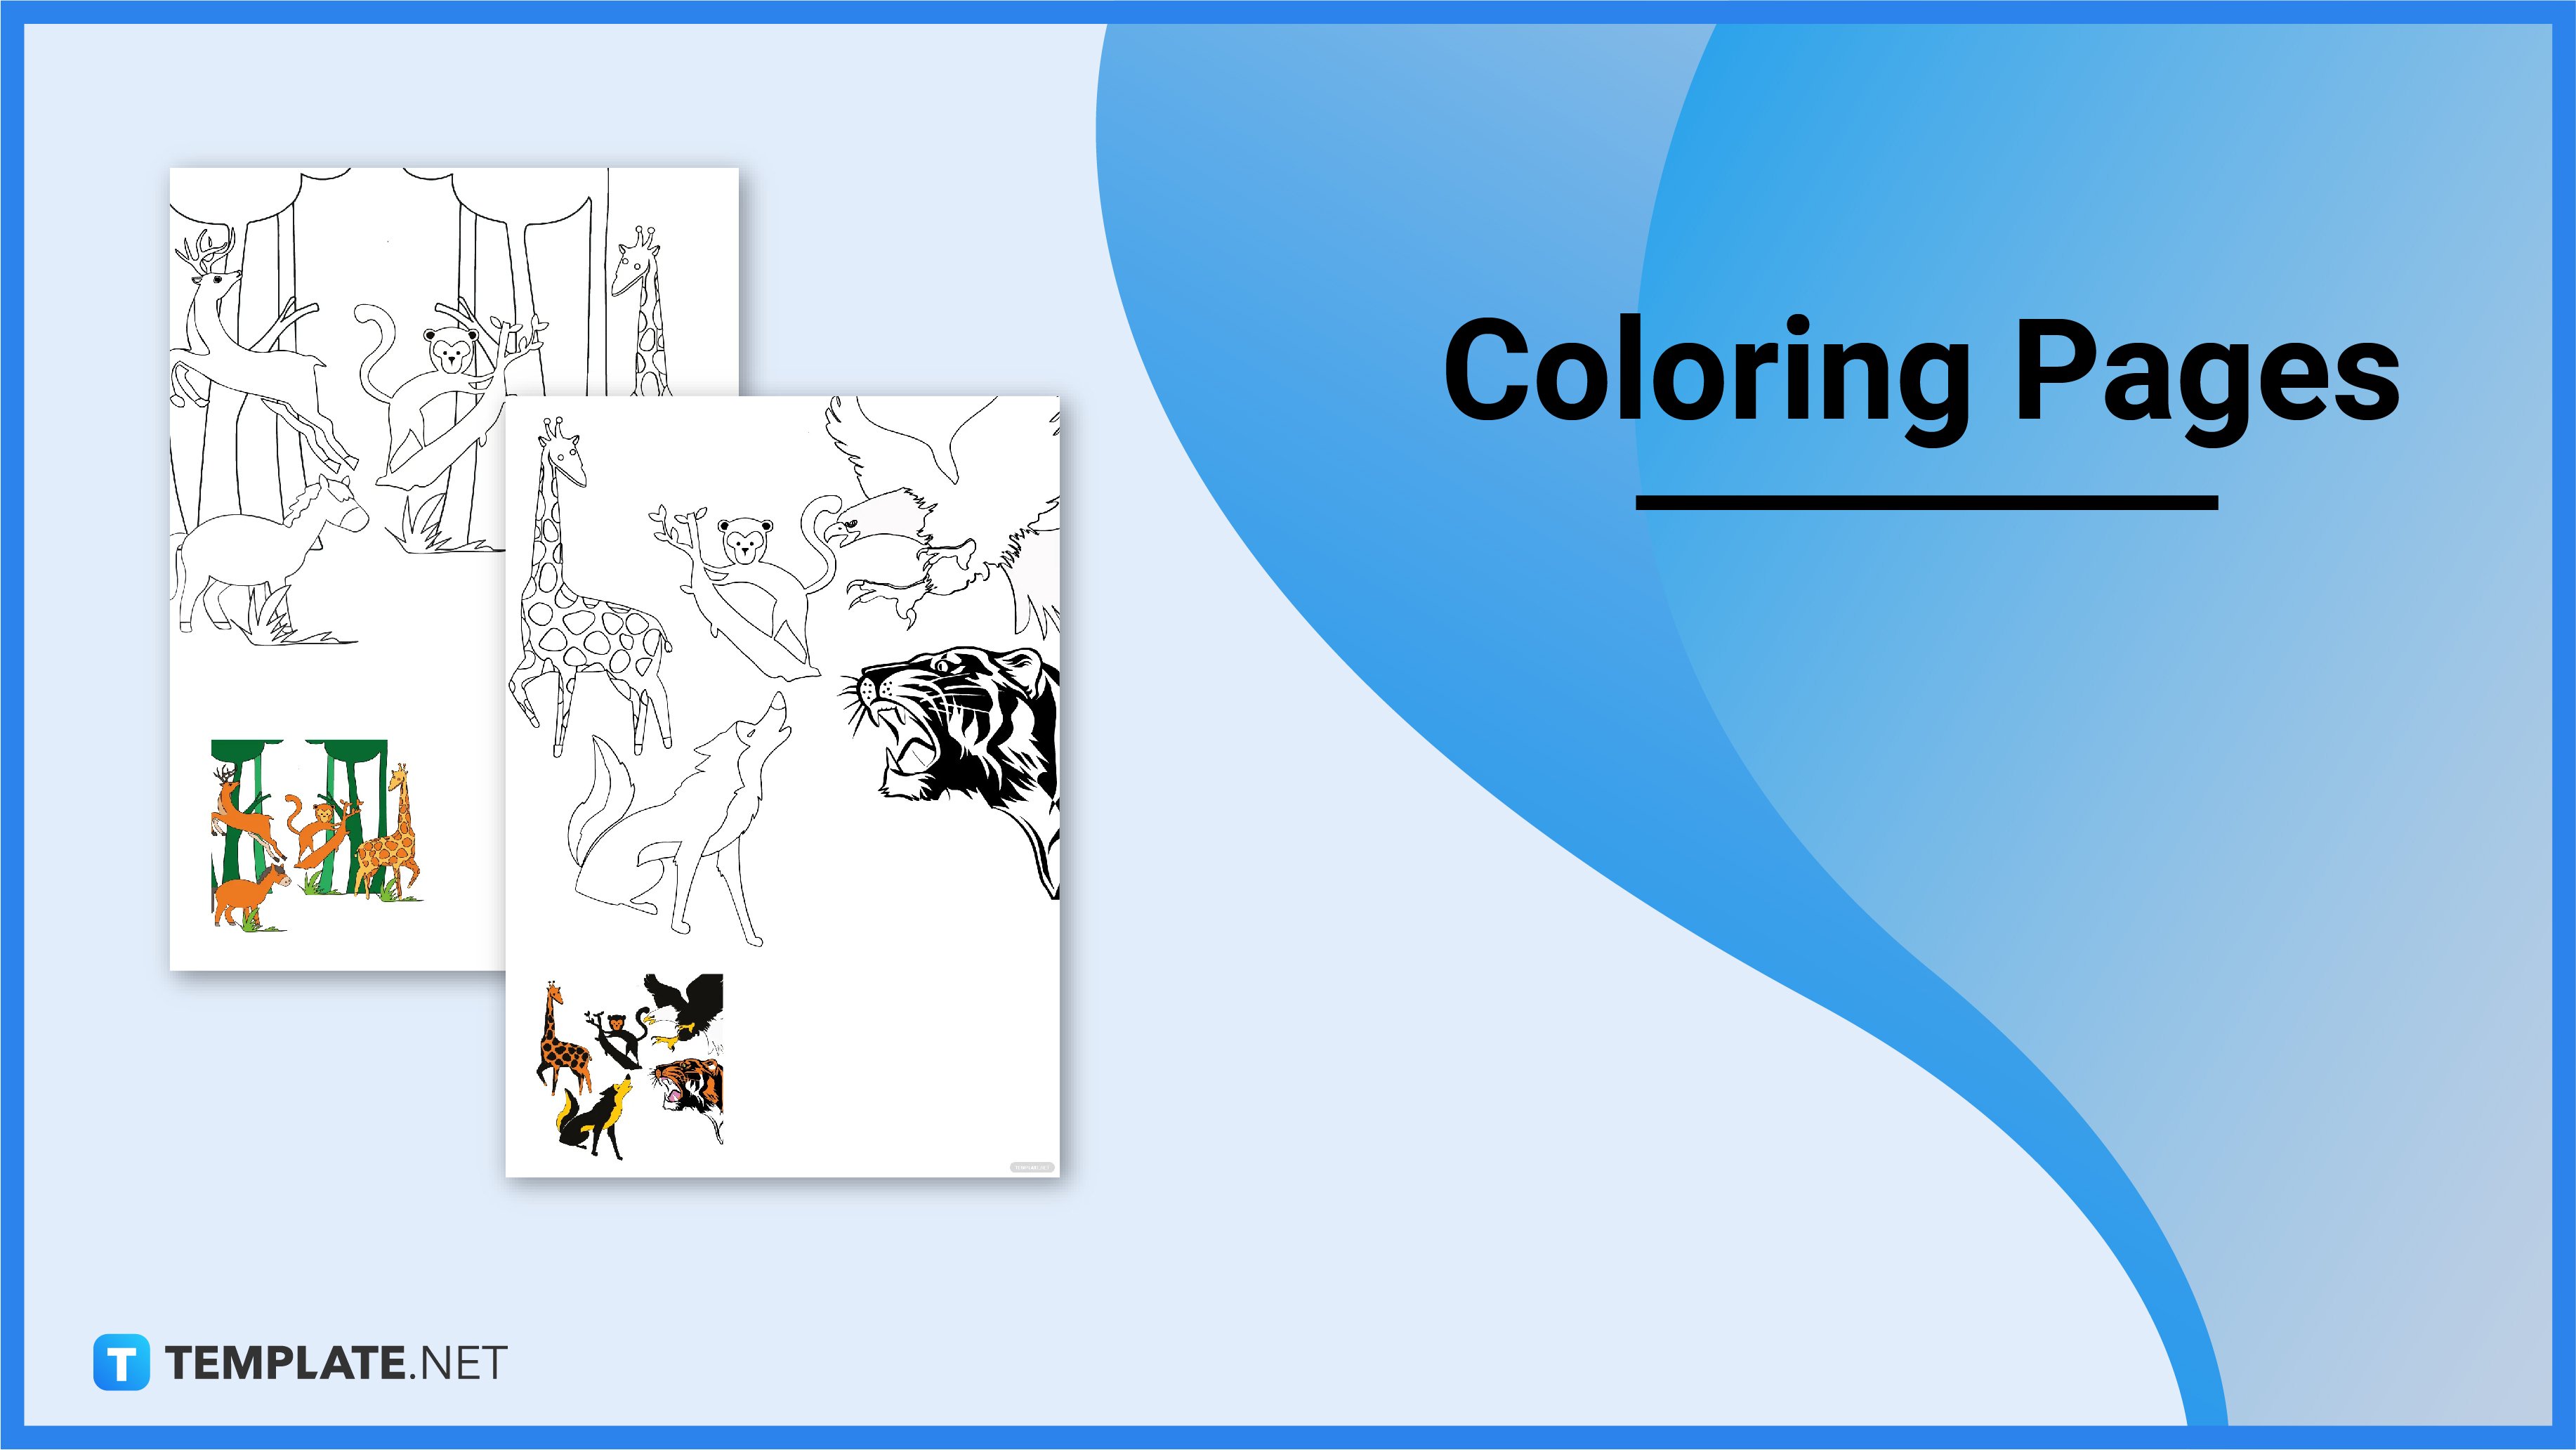 coloring-pages-what-is-a-coloring-pages-definition-types-uses